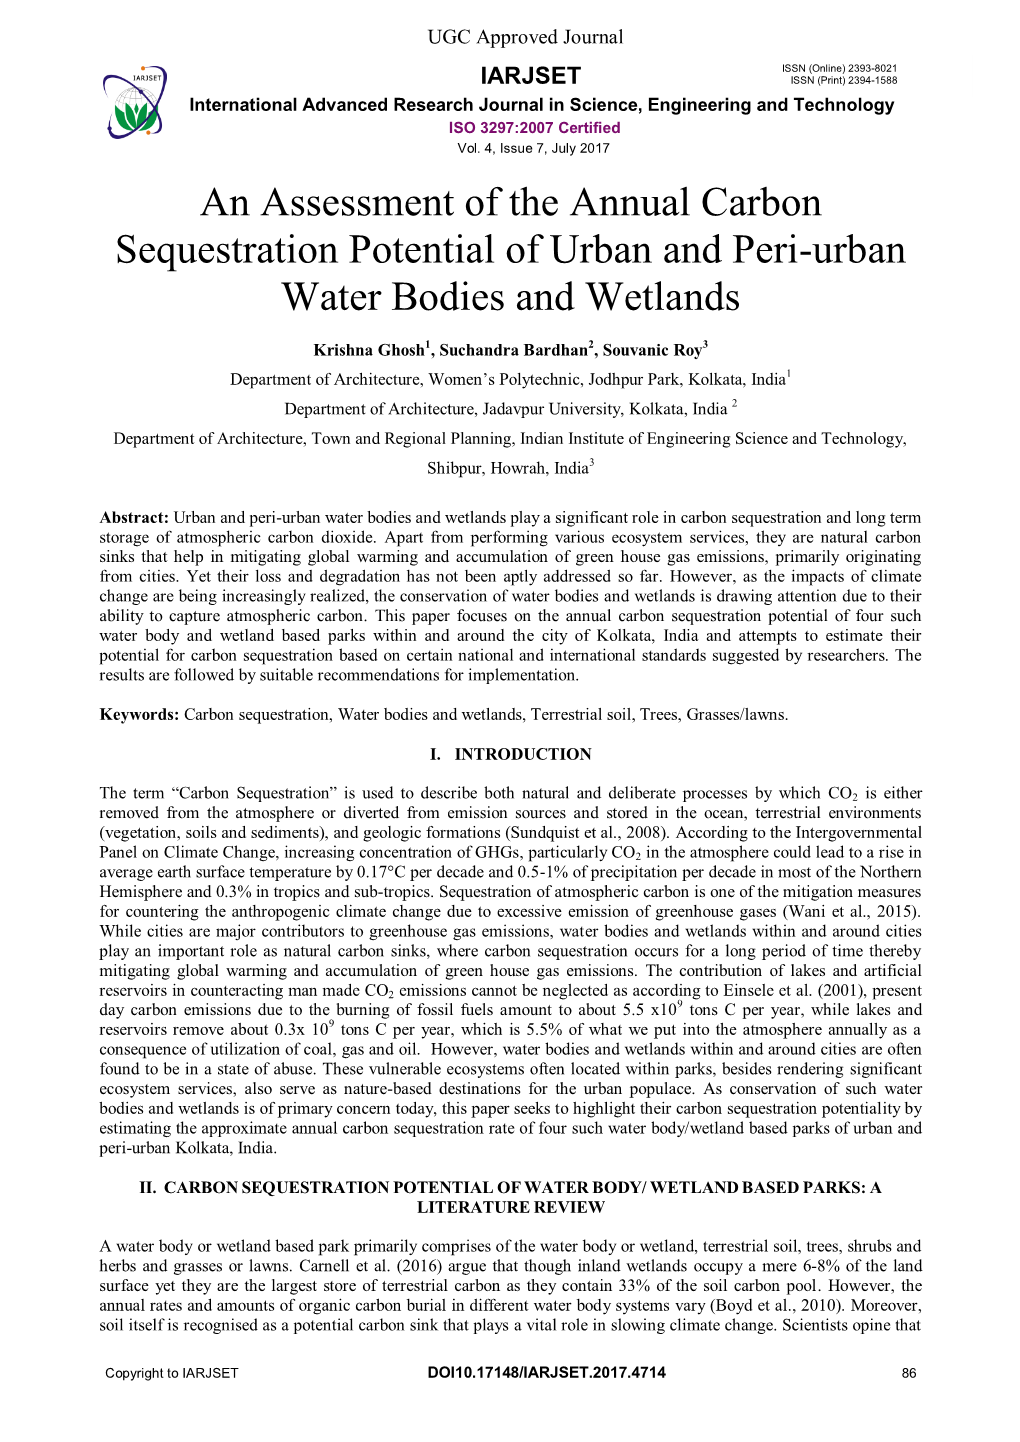 An Assessment of the Annual Carbon Sequestration Potential of Urban and Peri-Urban Water Bodies and Wetlands